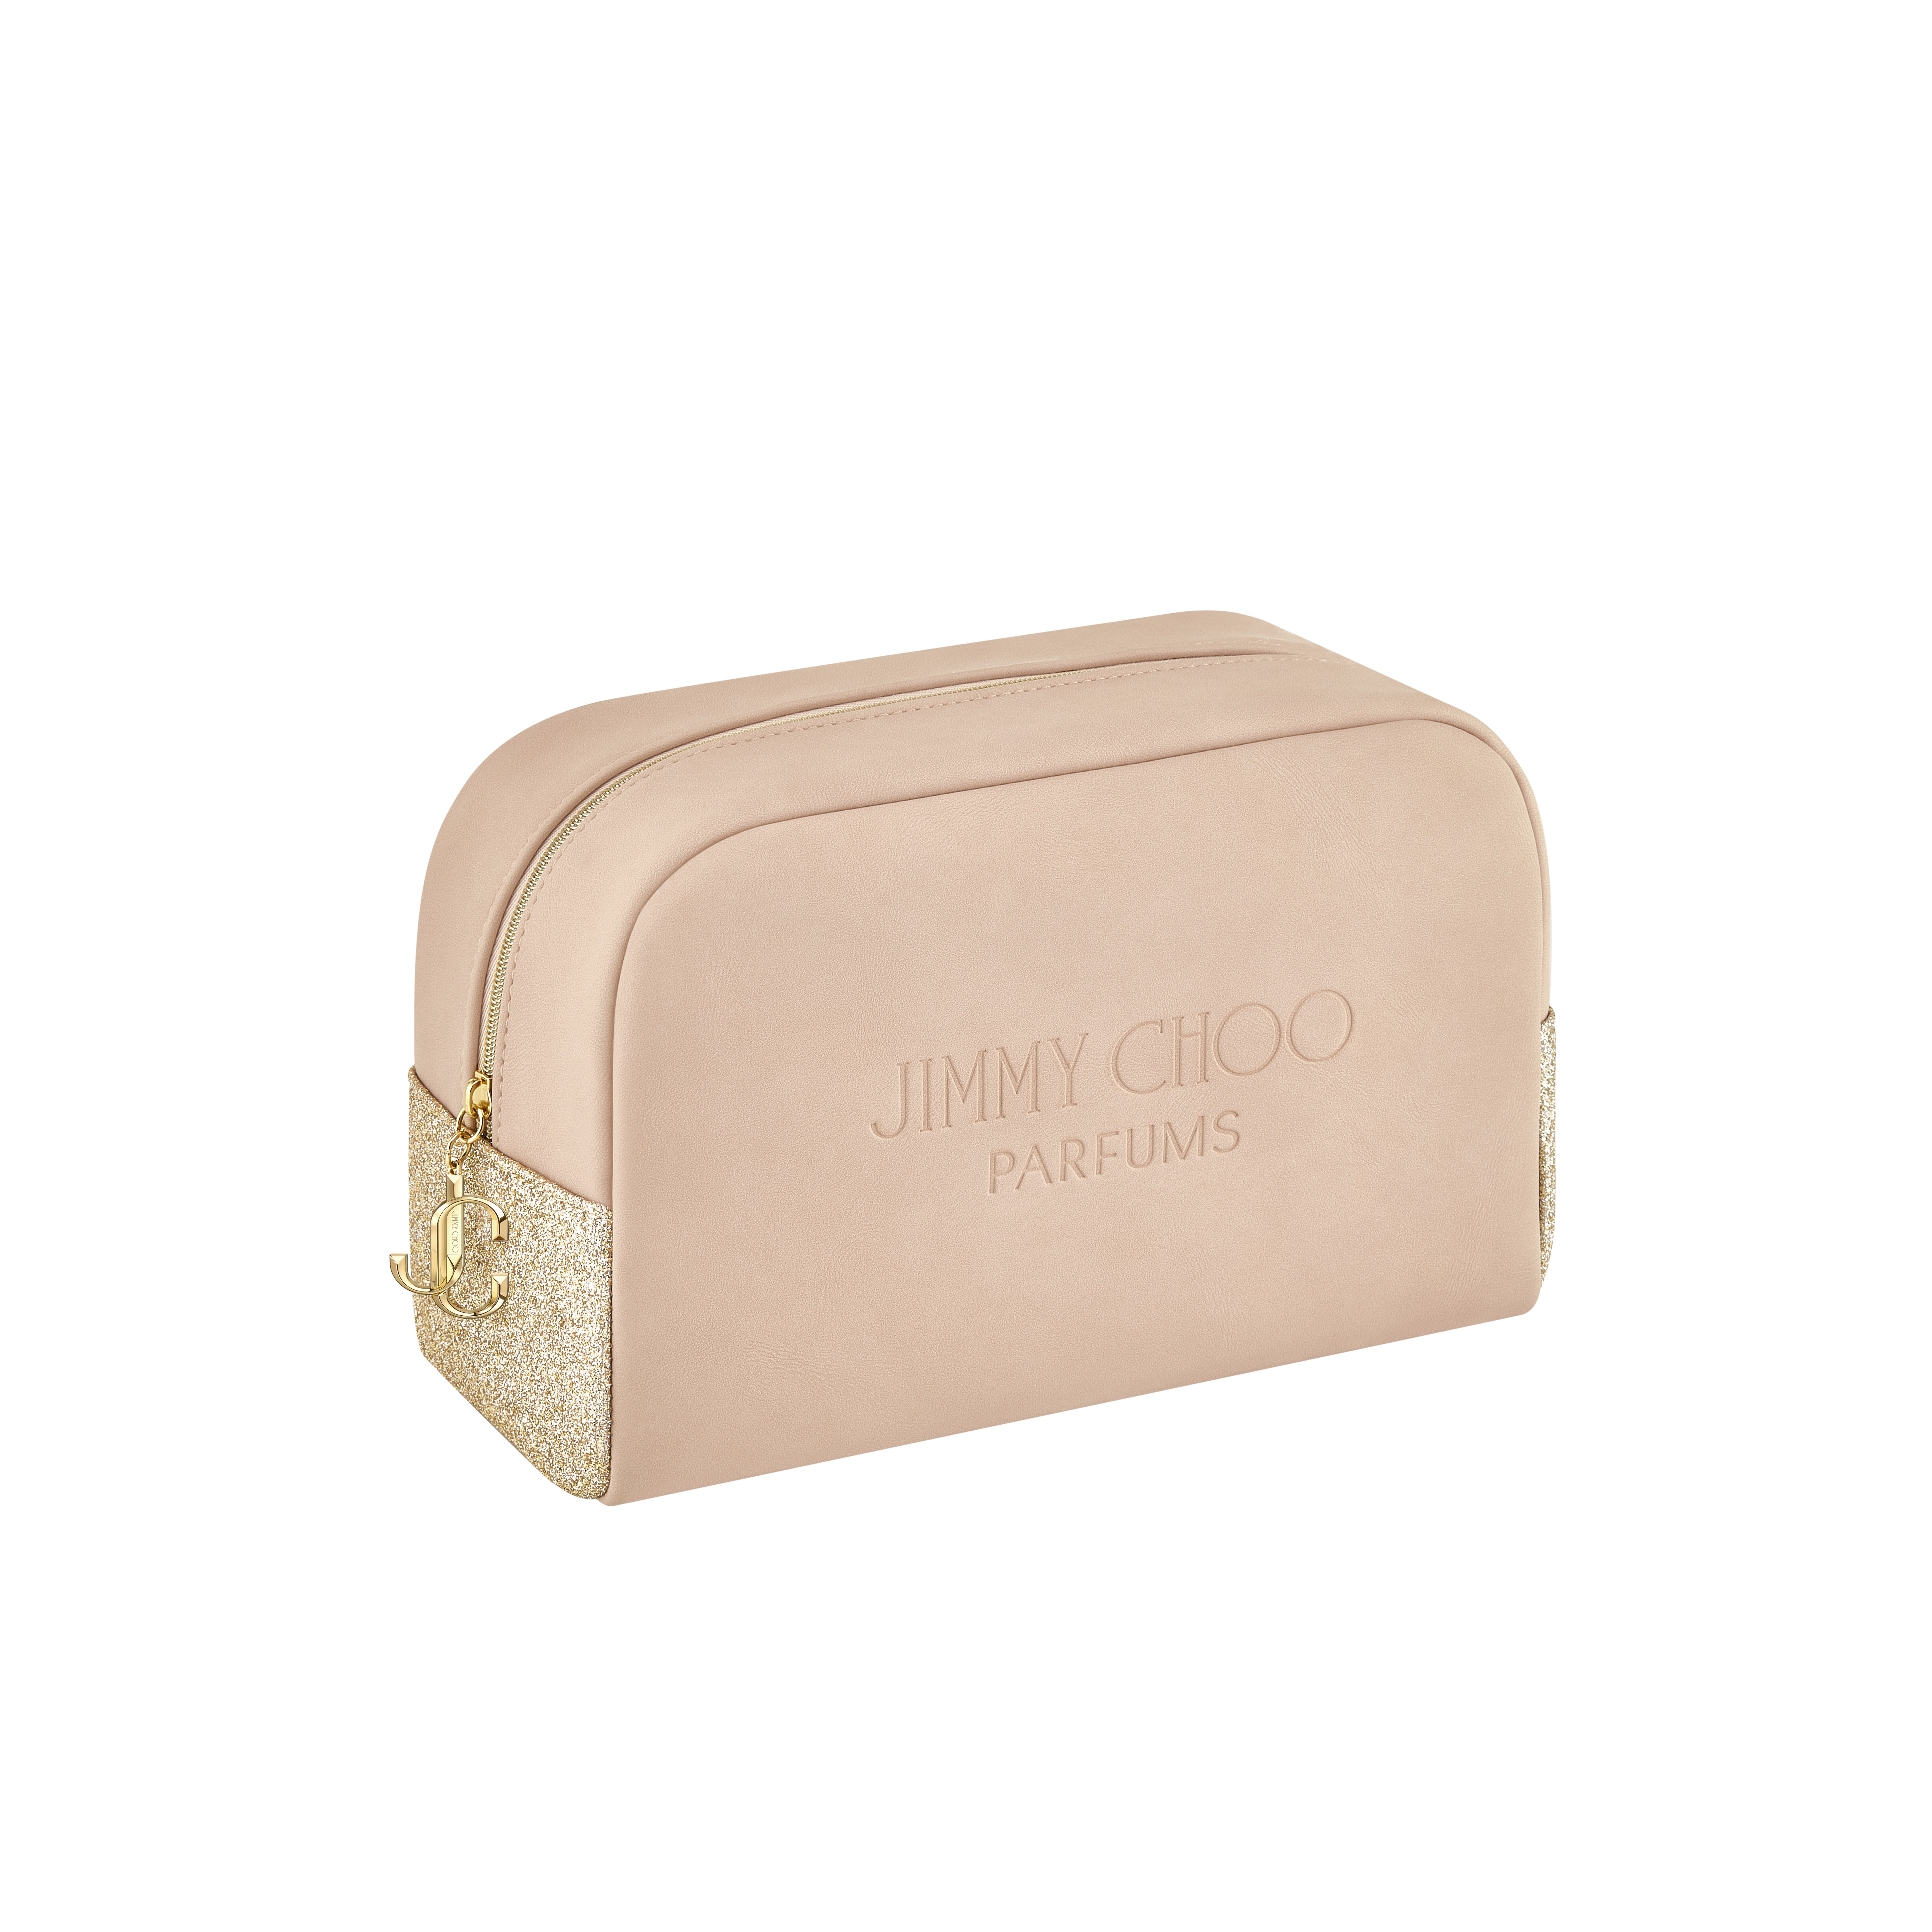 FREE Jimmy Choo Blossom Special Edition Pink / Gold Makeup Pouch